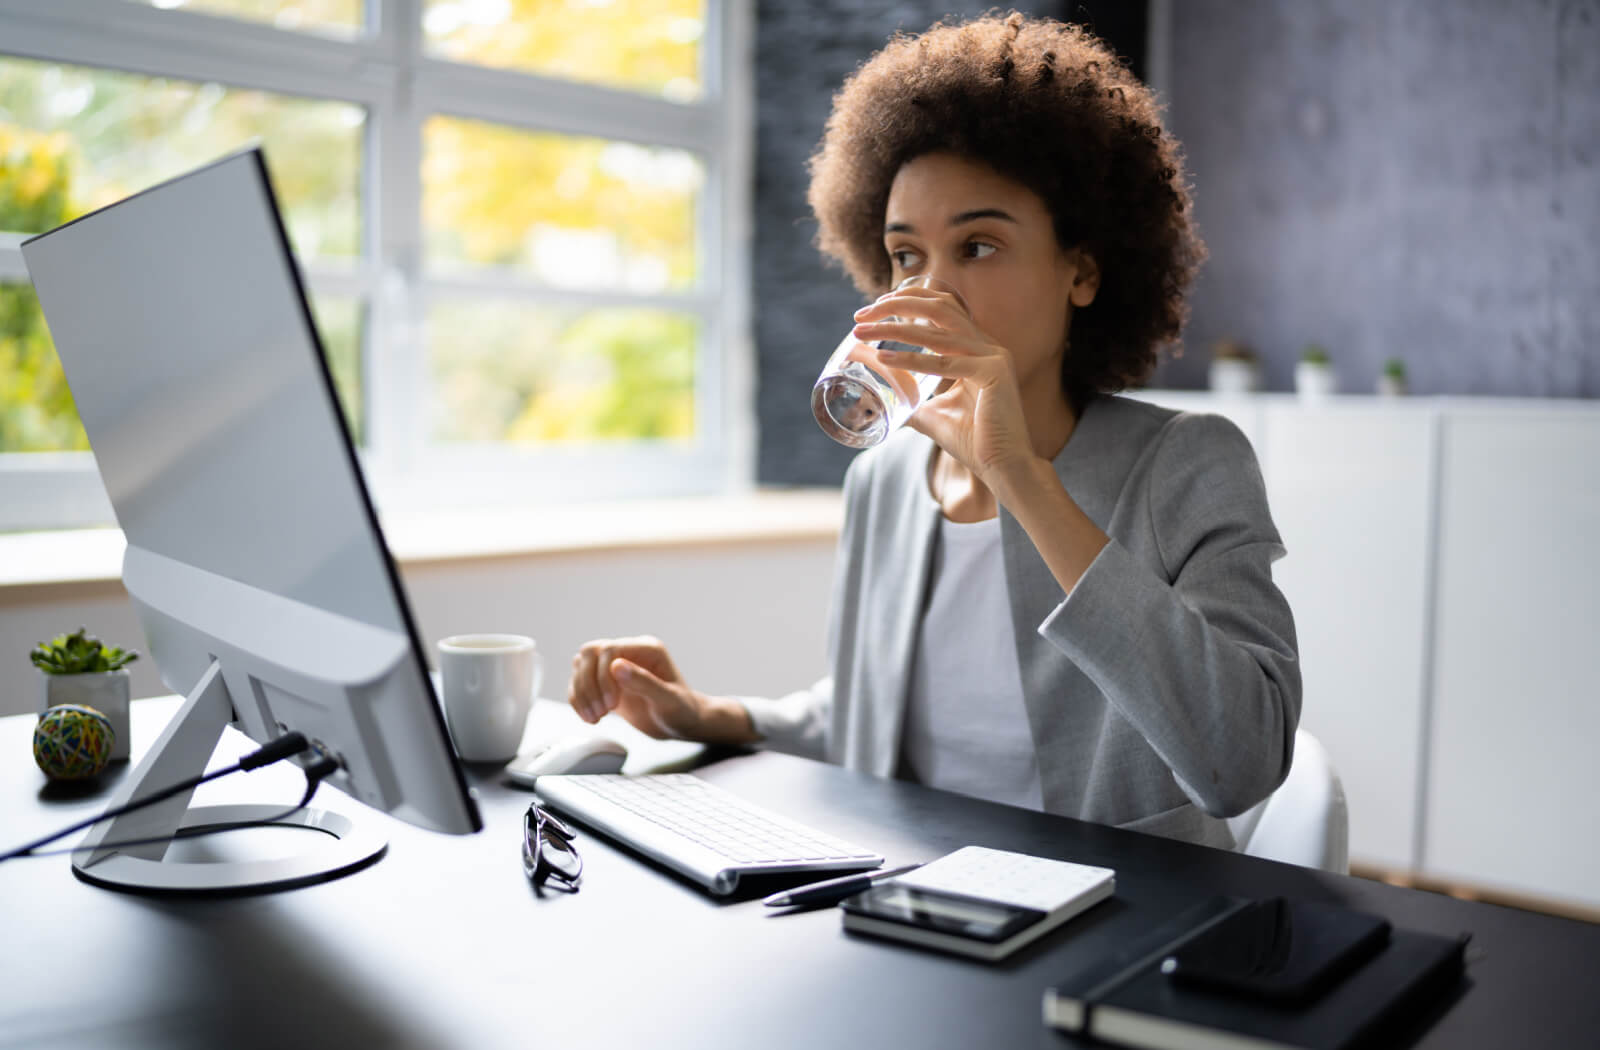 A professional-looking woman drinking water as she sits at a desk in front of a desktop computer.